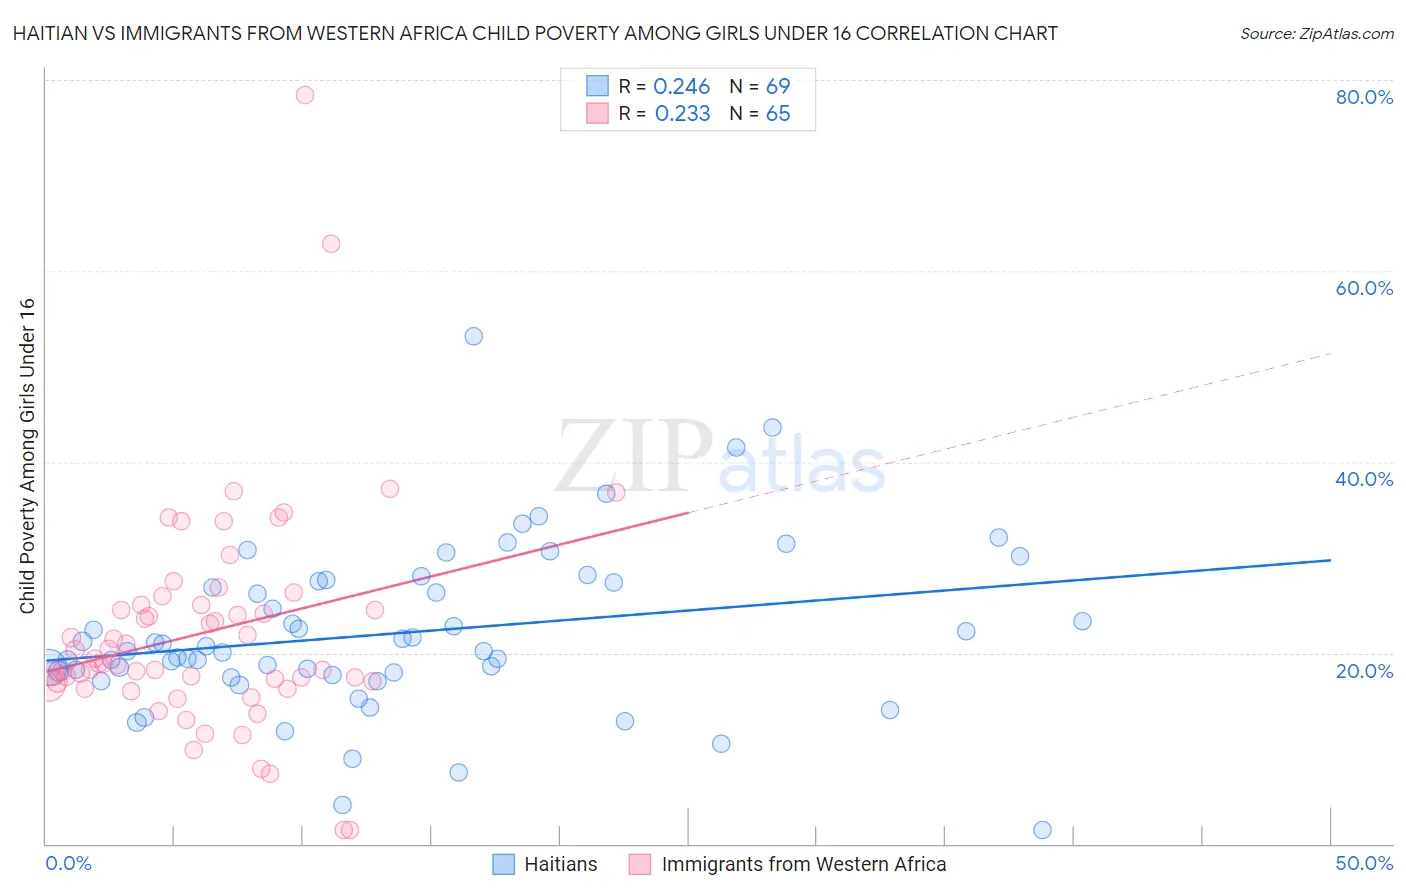 Haitian vs Immigrants from Western Africa Child Poverty Among Girls Under 16